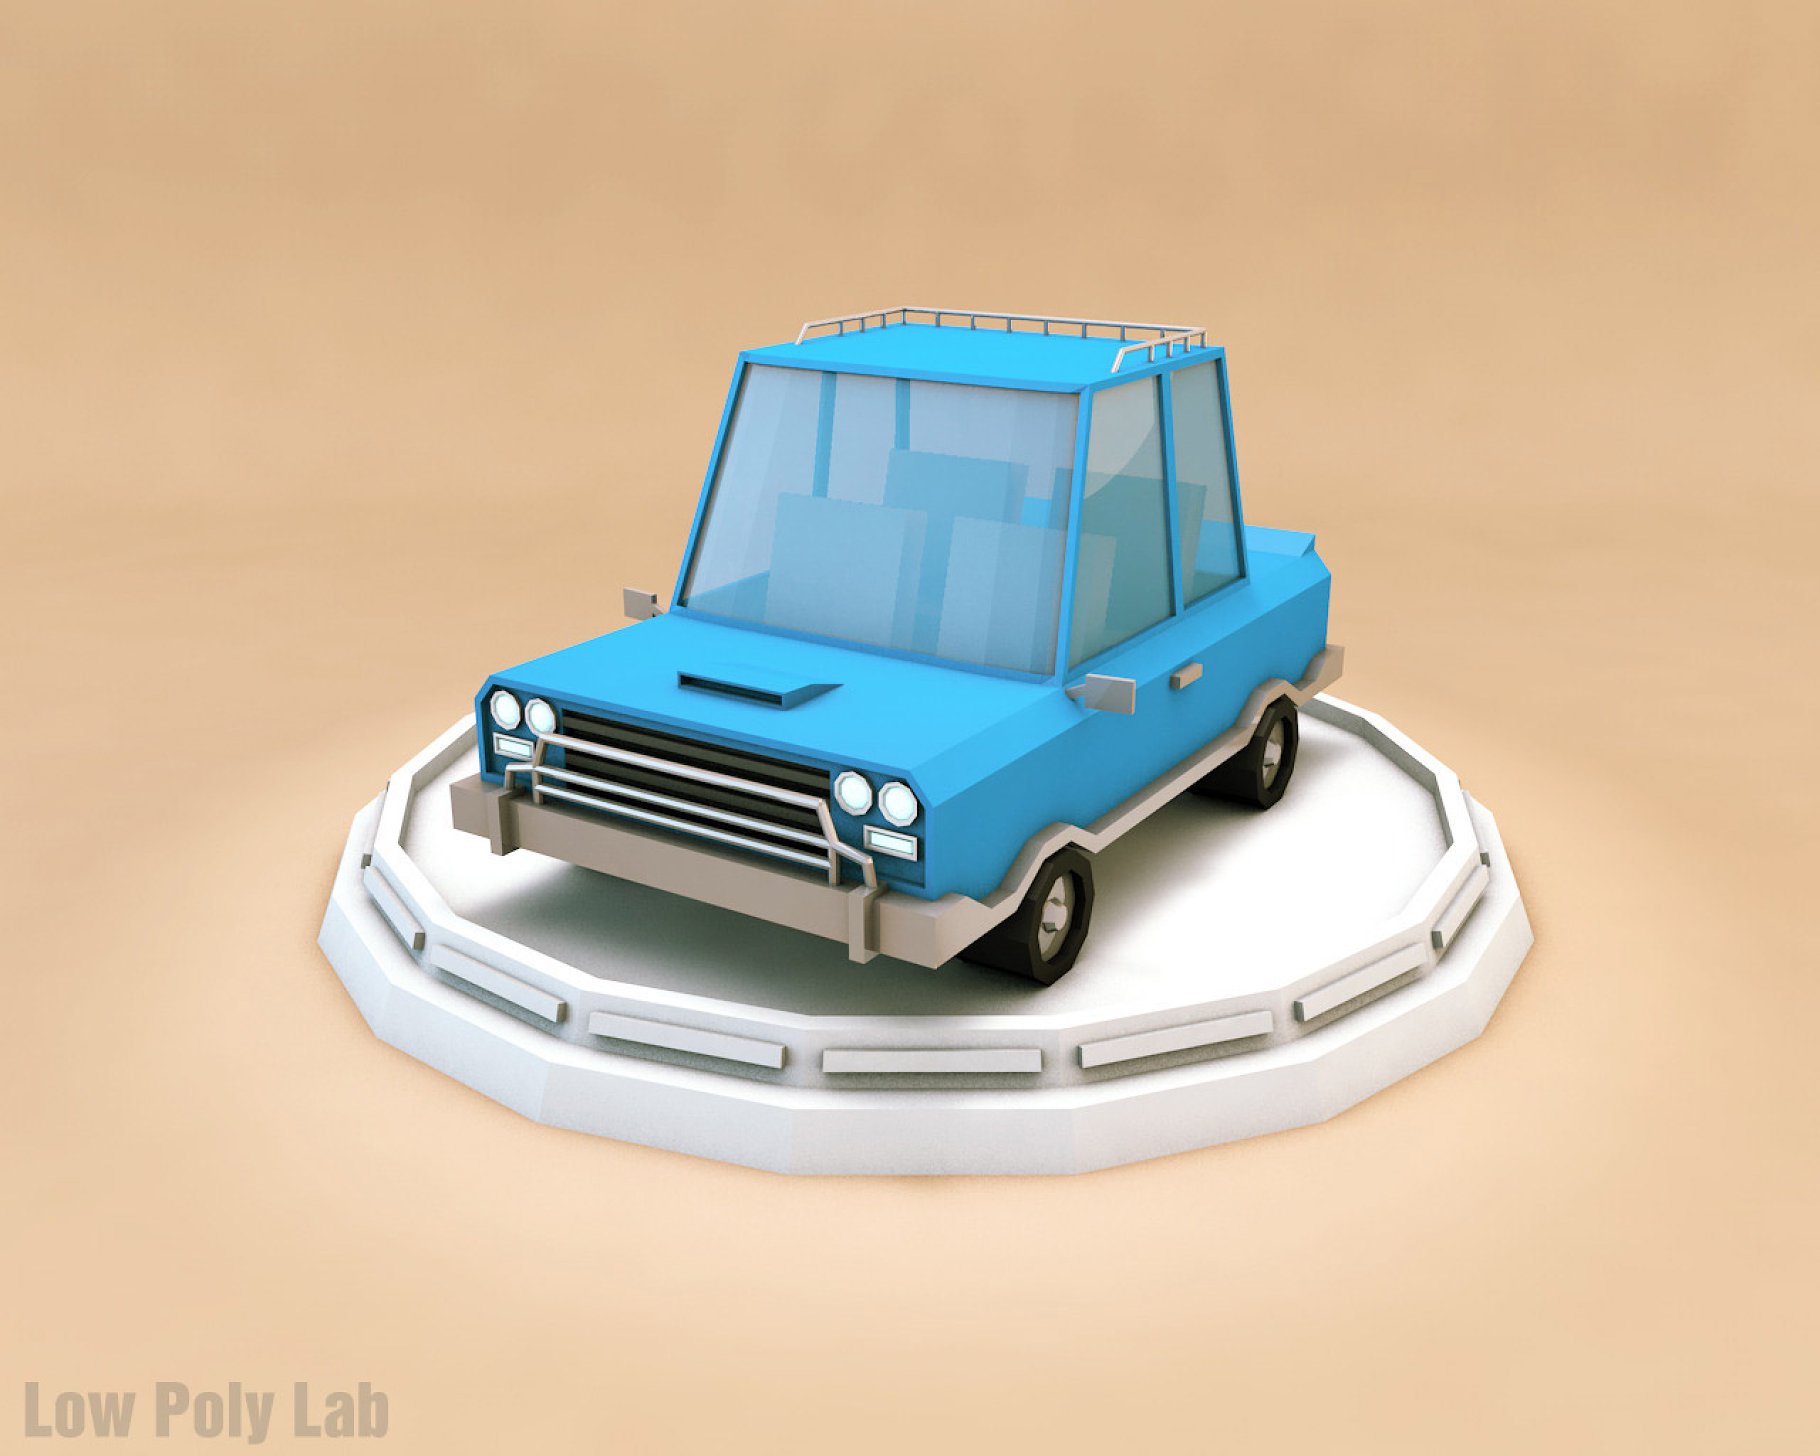 Blue front mockup of low poly car jeep on a beige background.